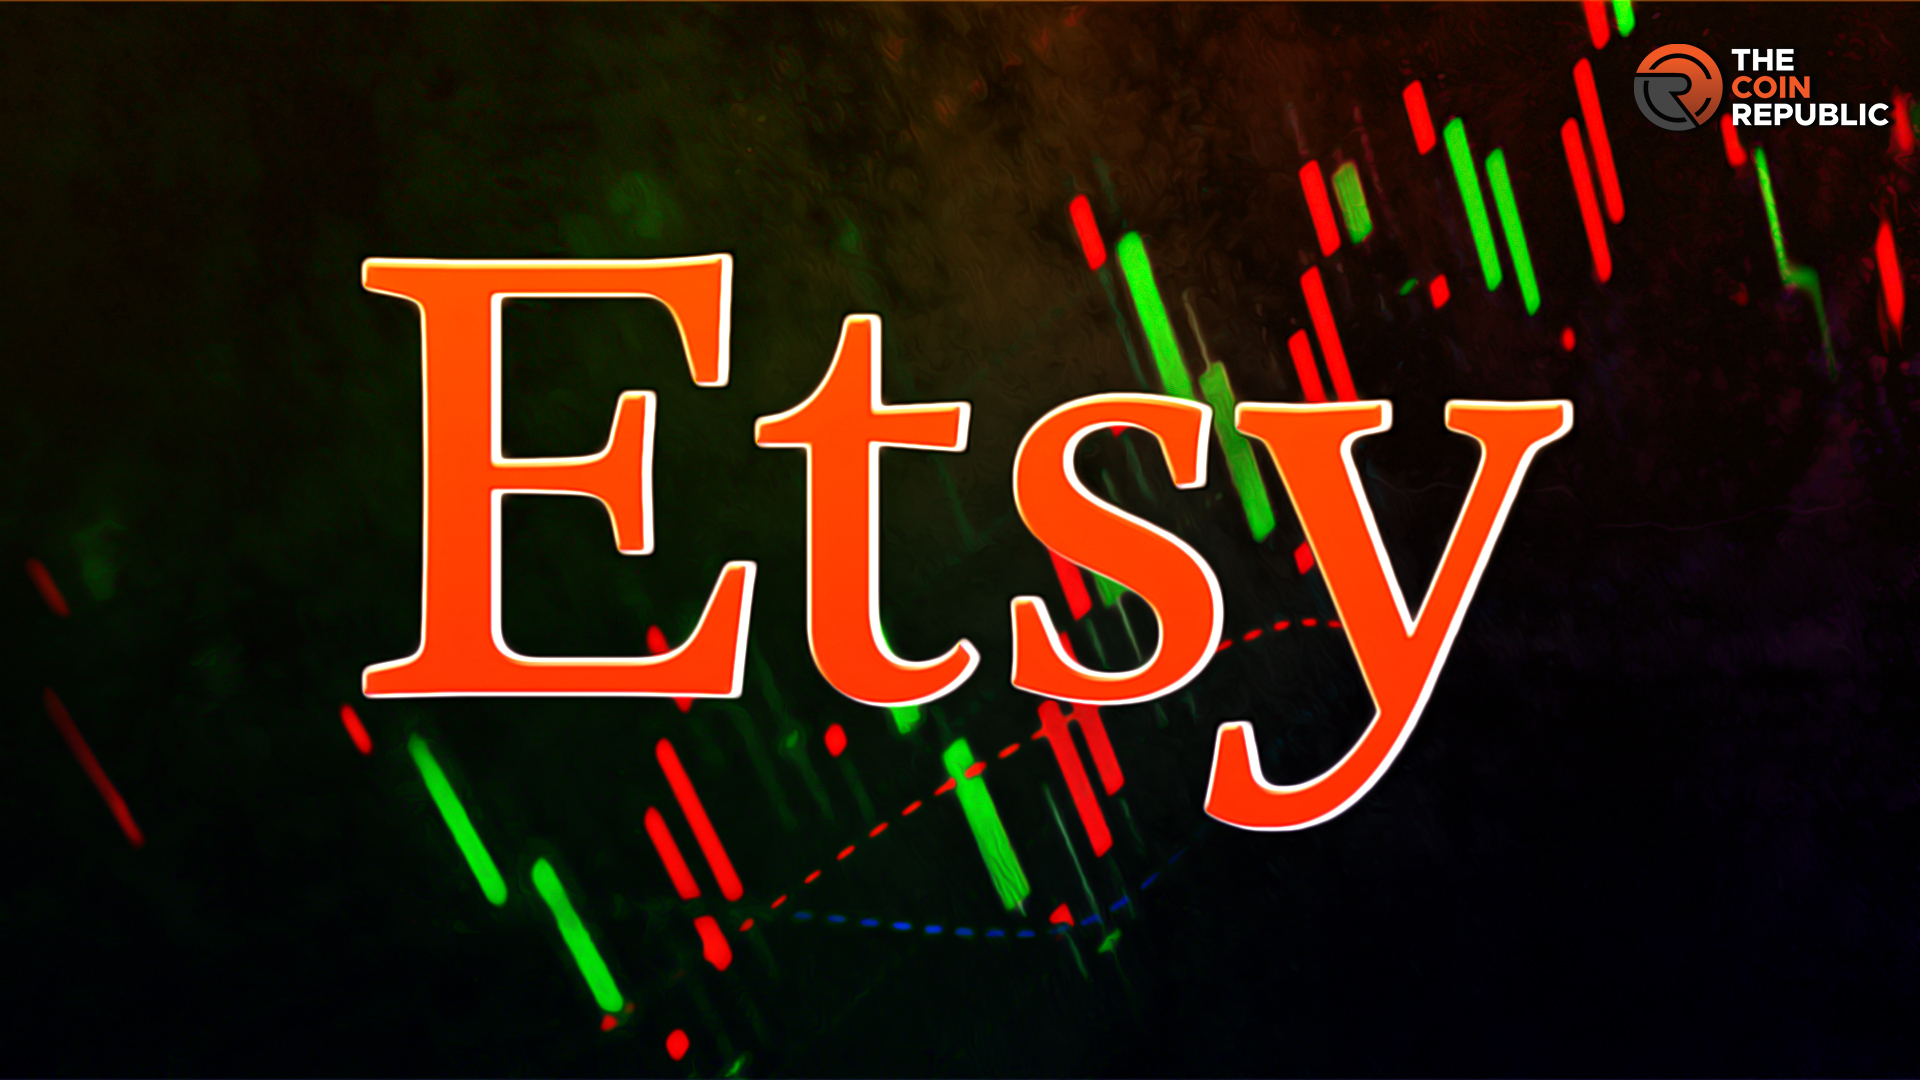 Can Etsy Stock Recover From A Record 3-Year Low, Hope For Buyers?